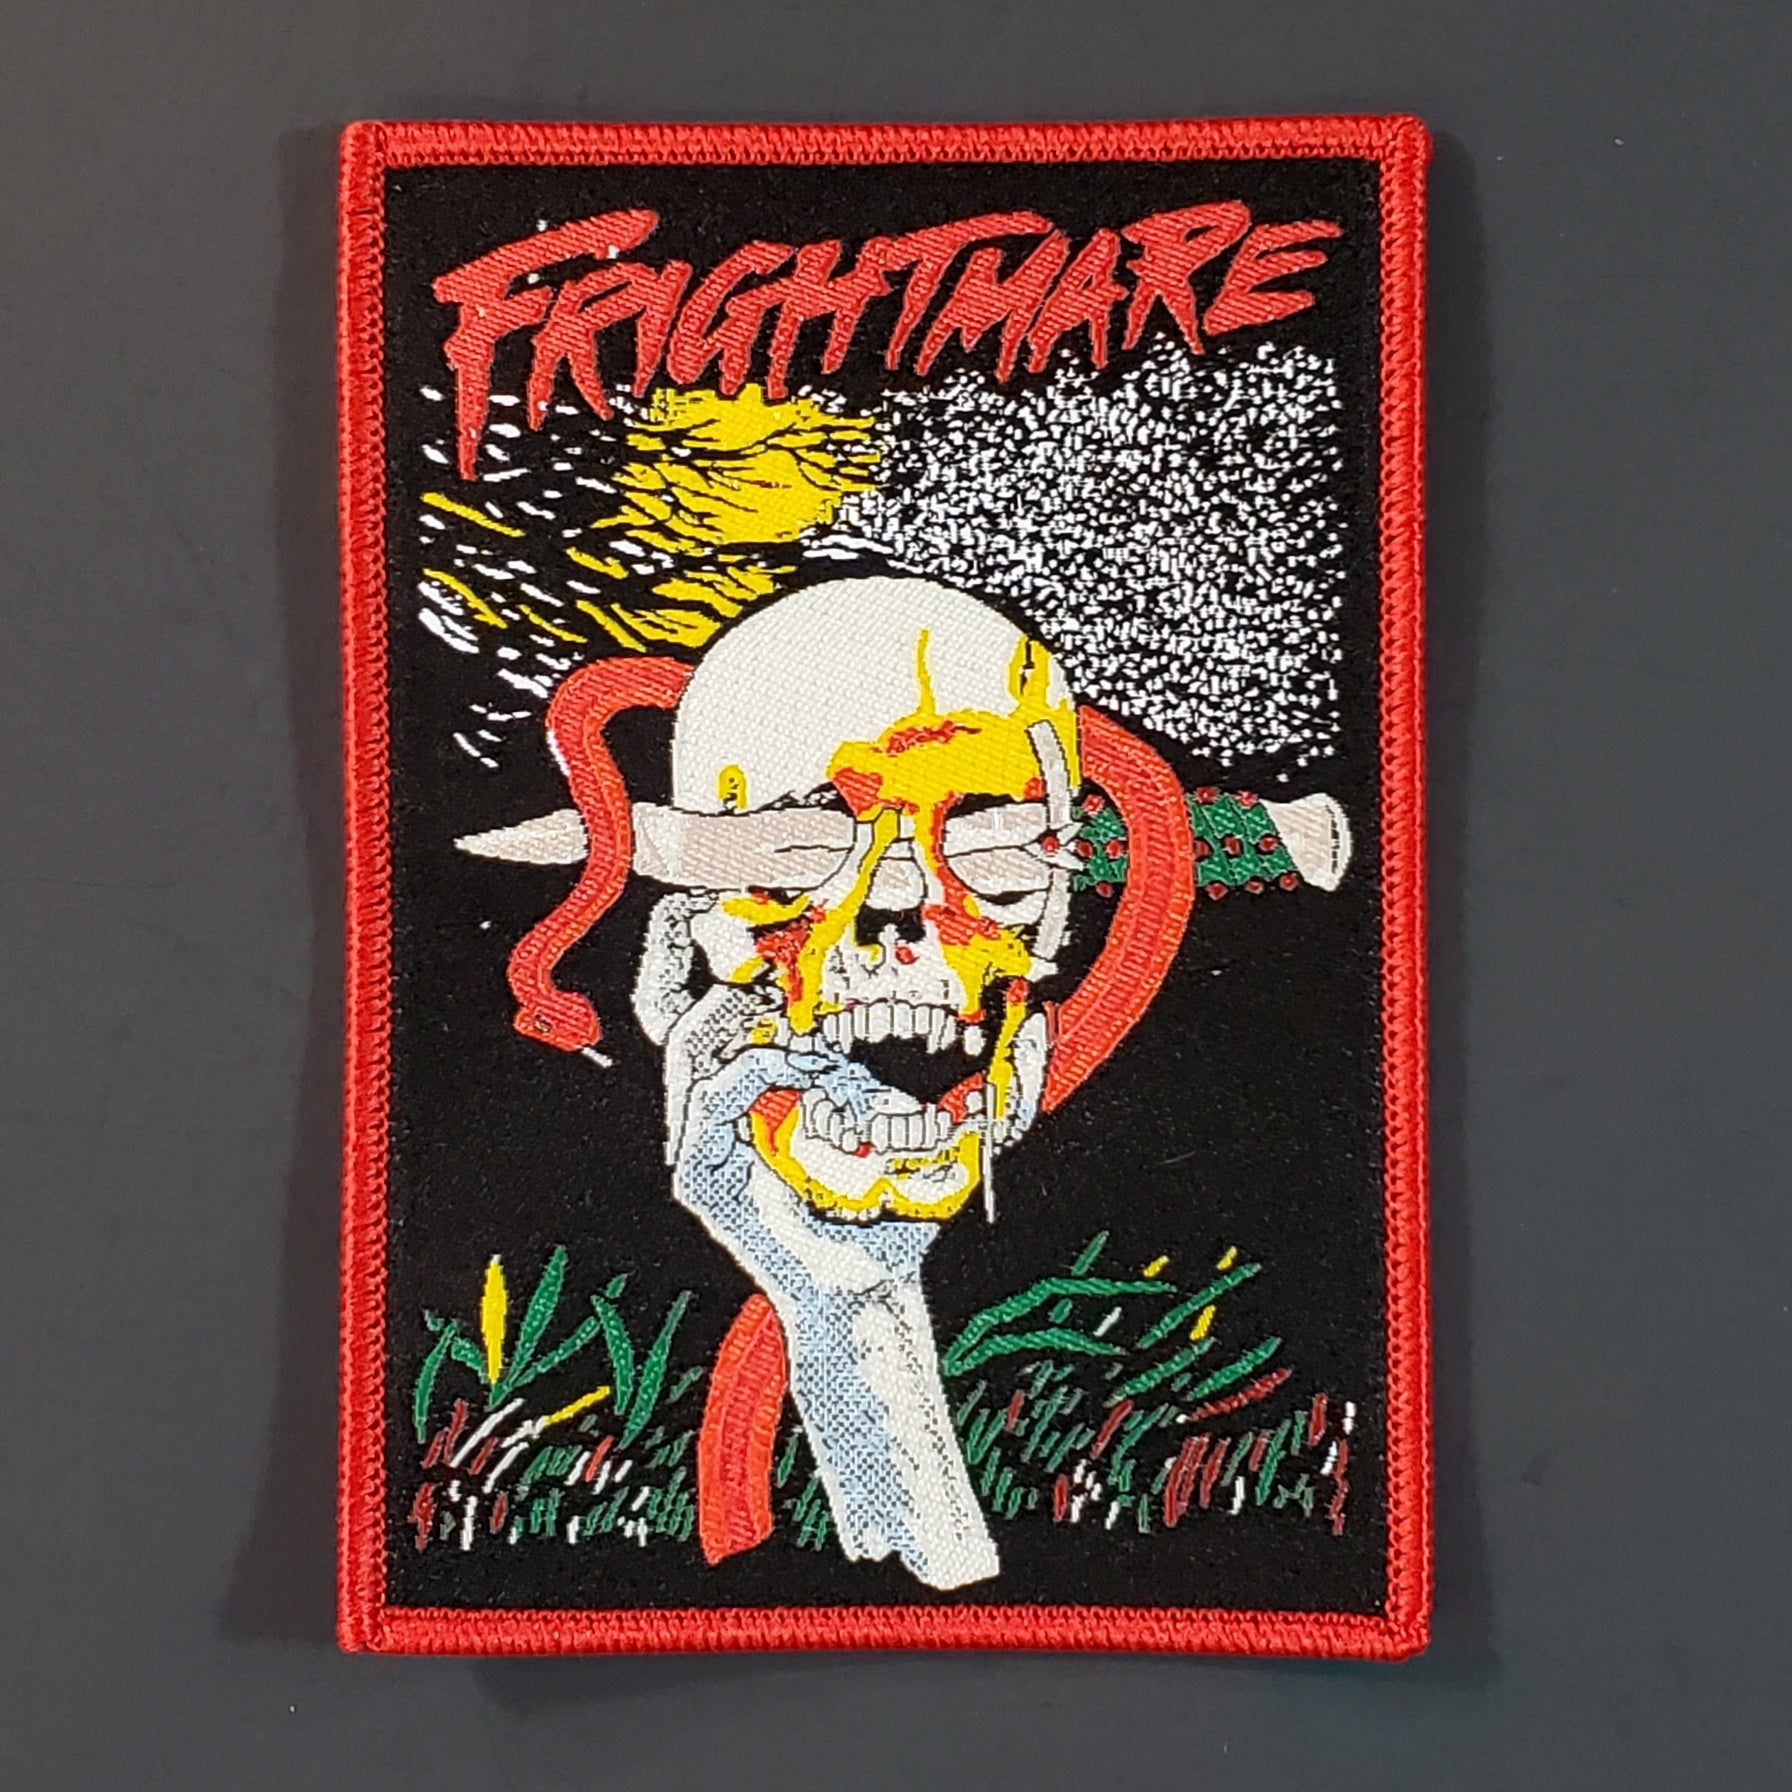 Rectangular red, yellow, green, grey, and black woven patch with illustration from the movie Frightmare depicting a hand holding a skull with a large blade stuck through the eye socket with a red snake coiled around it